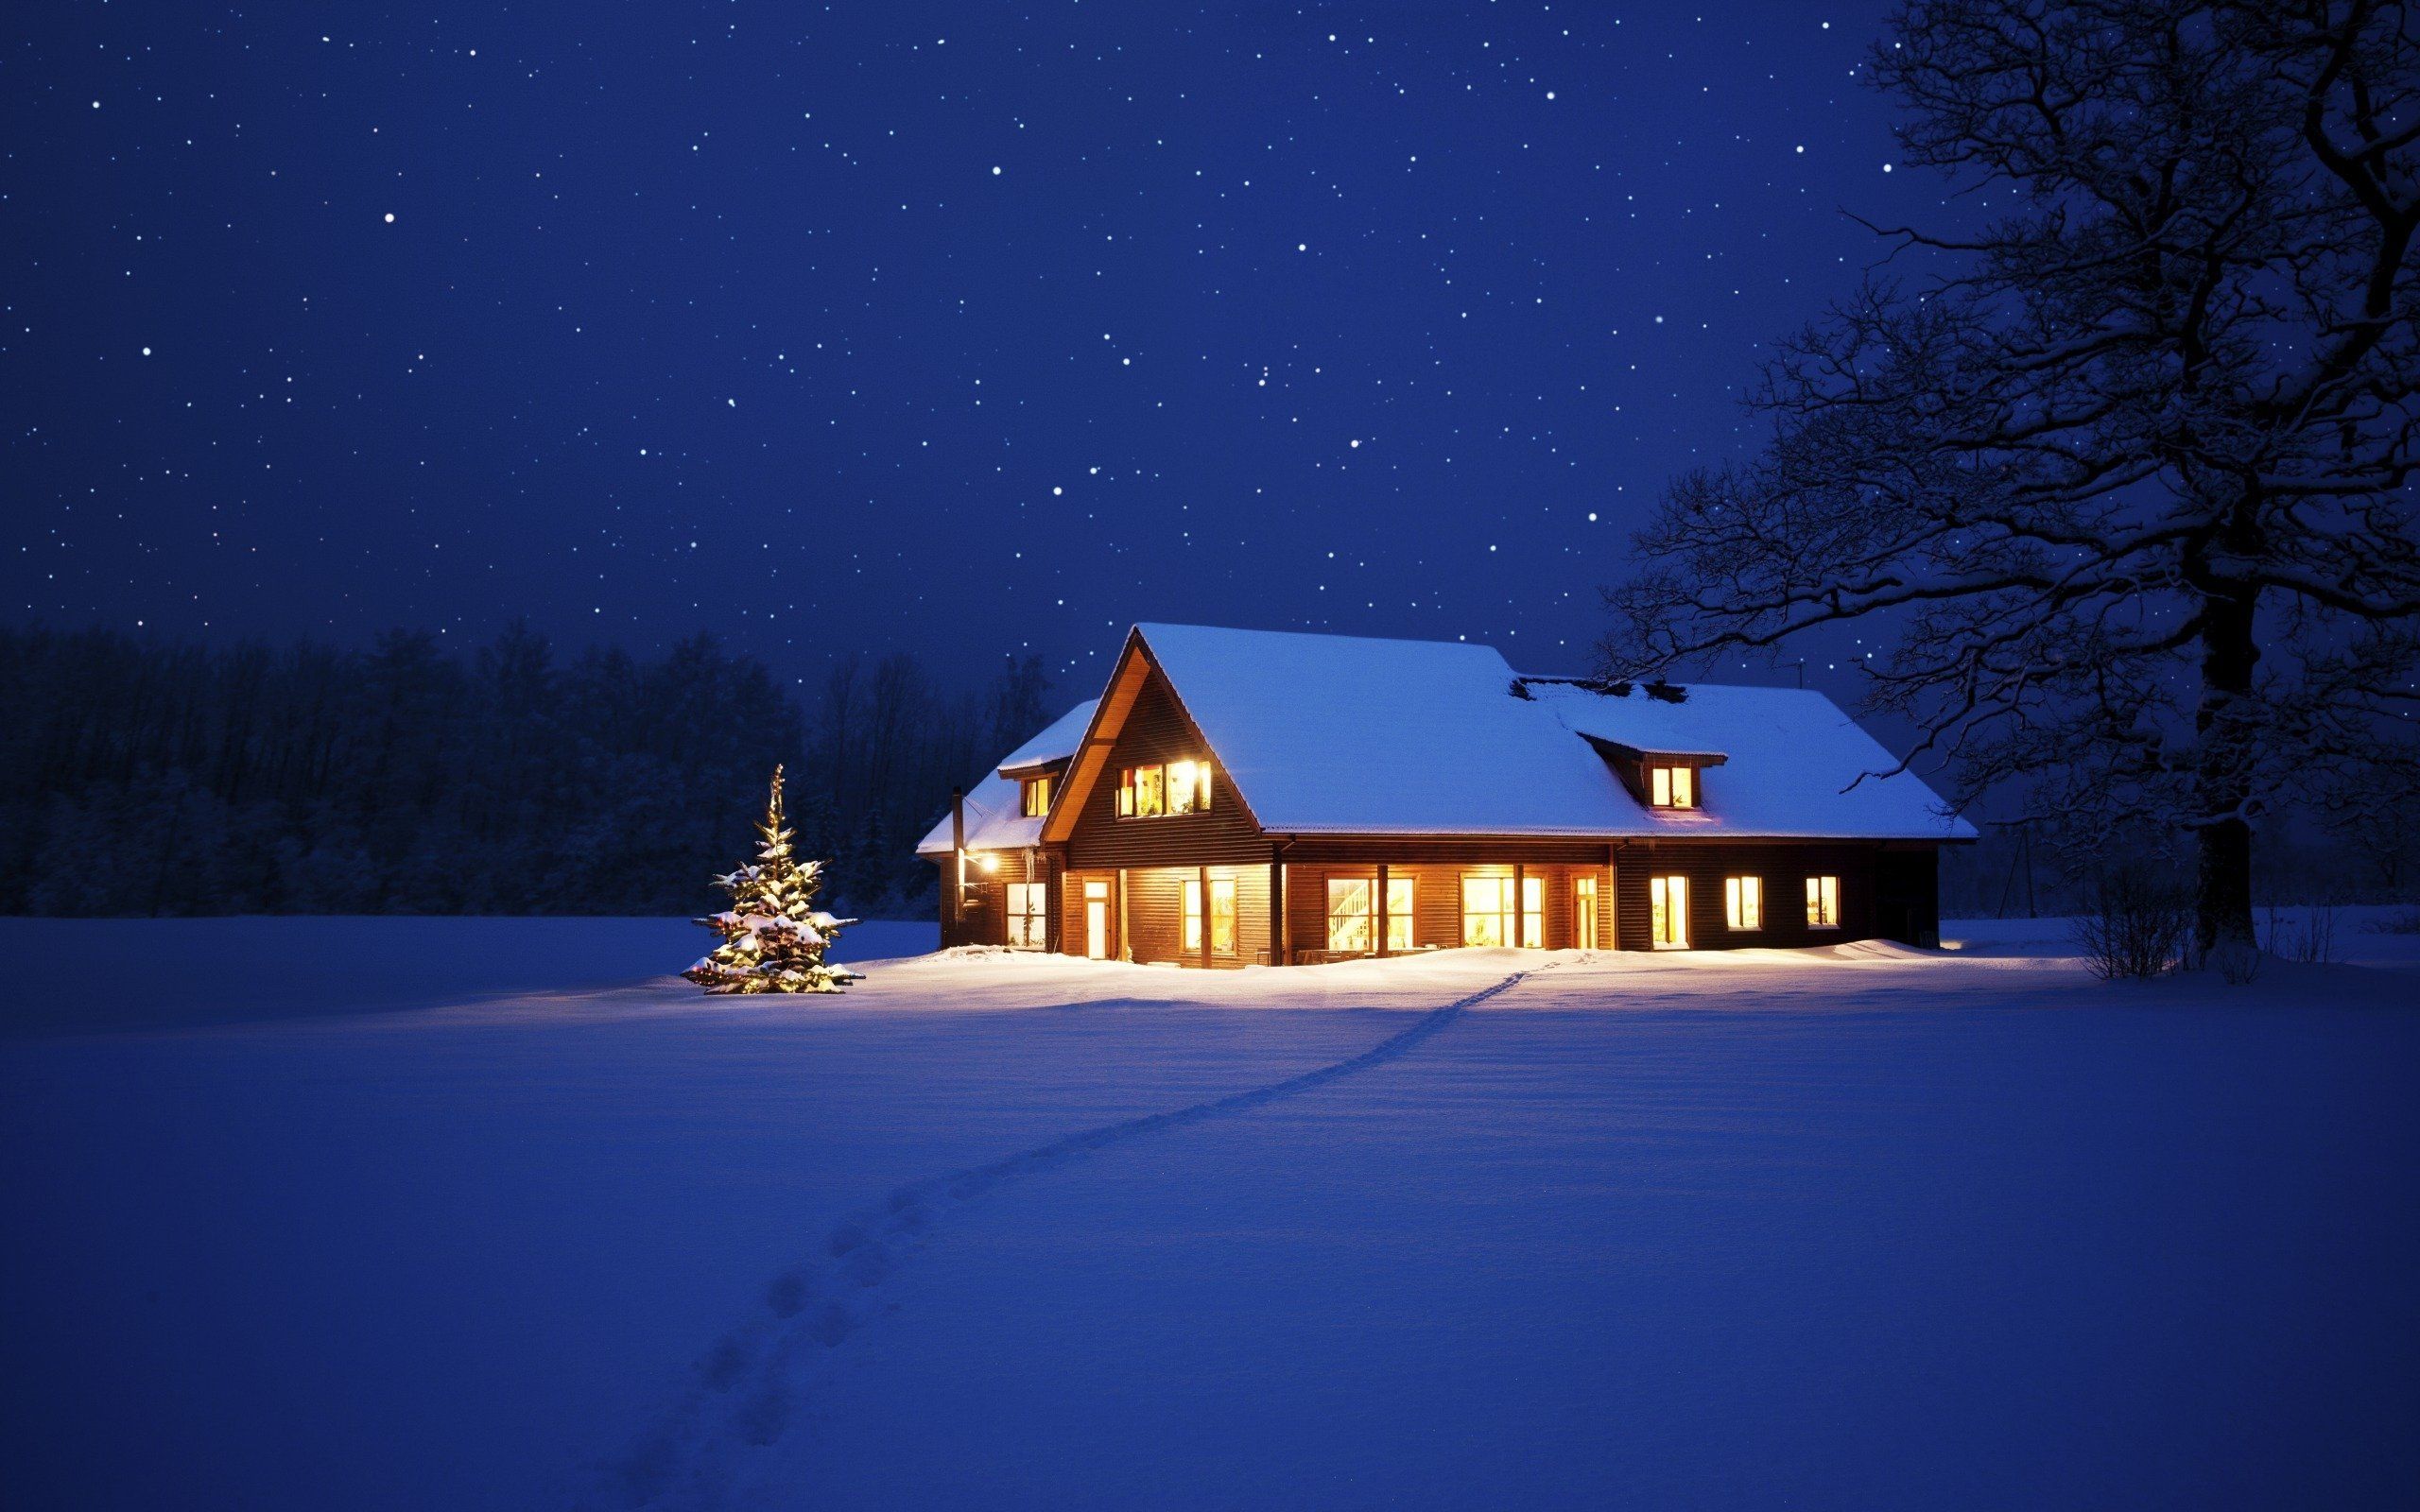 Cool Winter Night 4K Wallpaper For Your Desktop Or Mobile Screen Free And Easy To Download